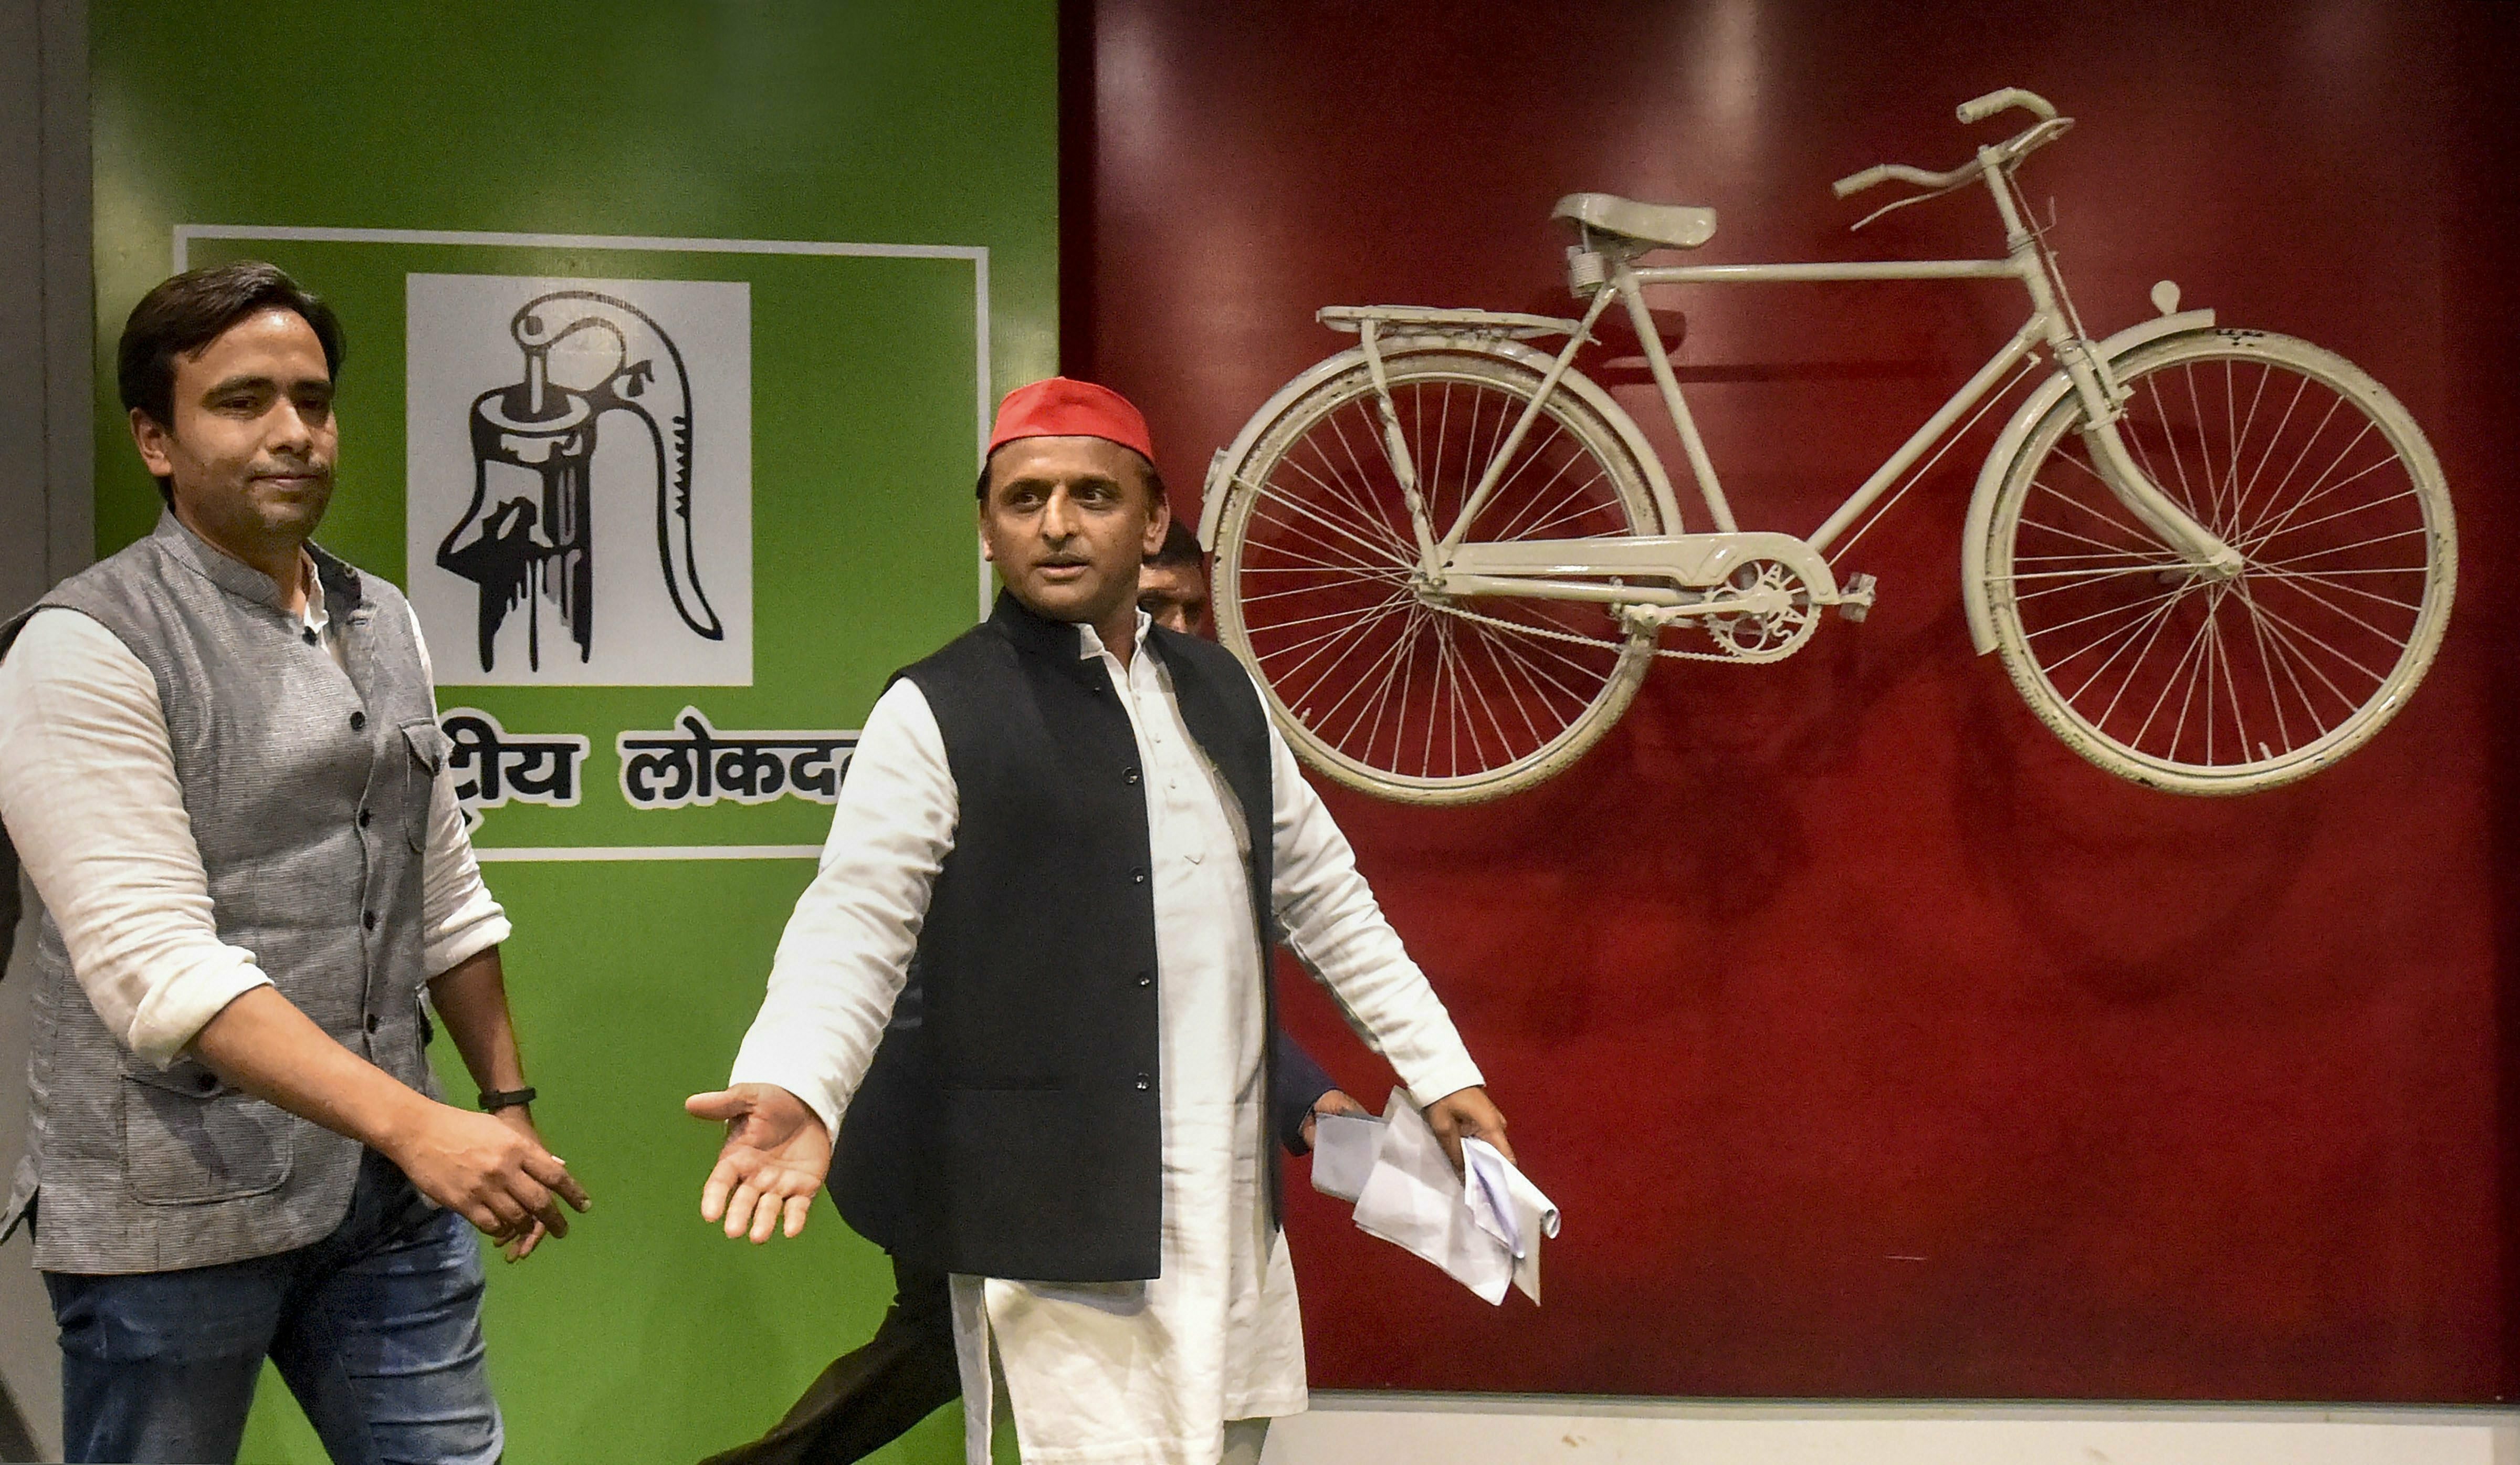 Samajwadi Party (SP) President Akhilesh Yadav and RLD Vice President Jayant Chaudhary arrive for a joint press conference, at the SP office - PTI